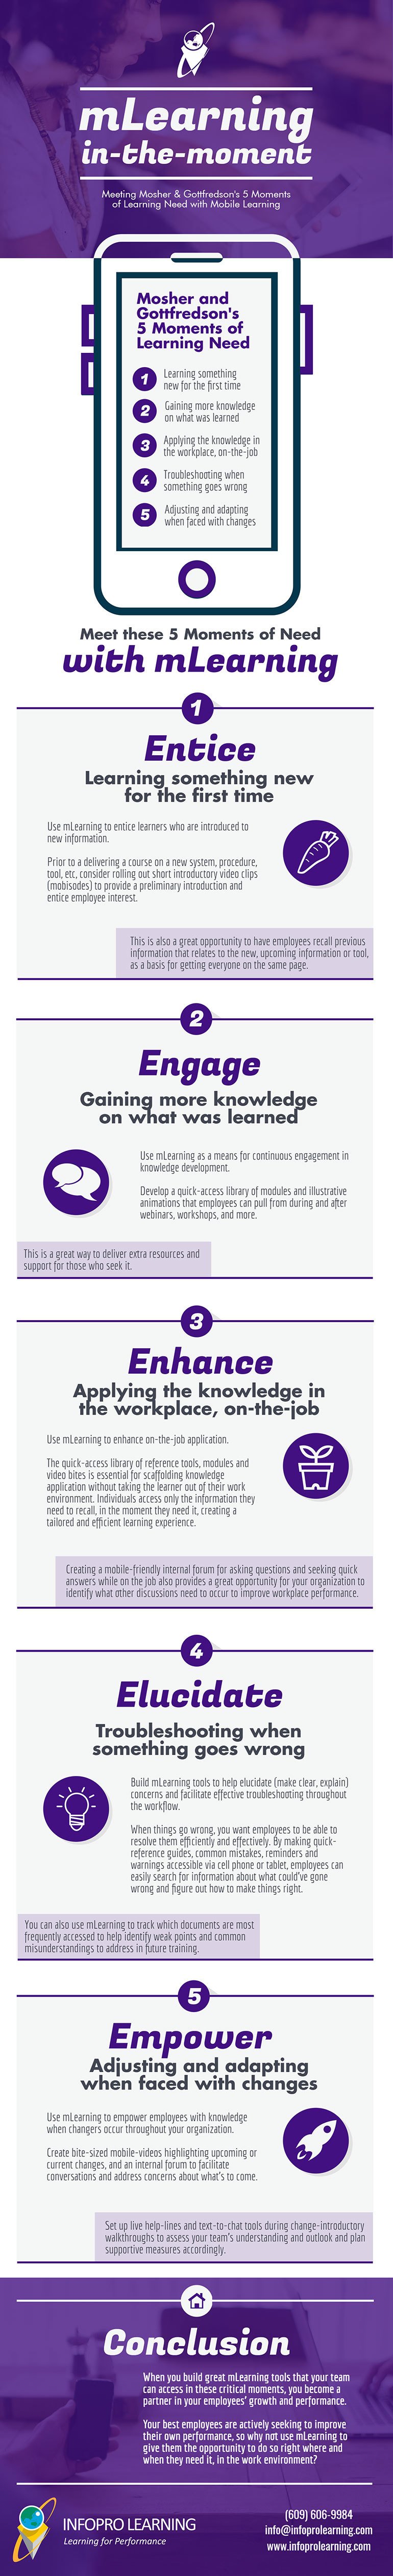 mLearning in-the-Moment Infographic